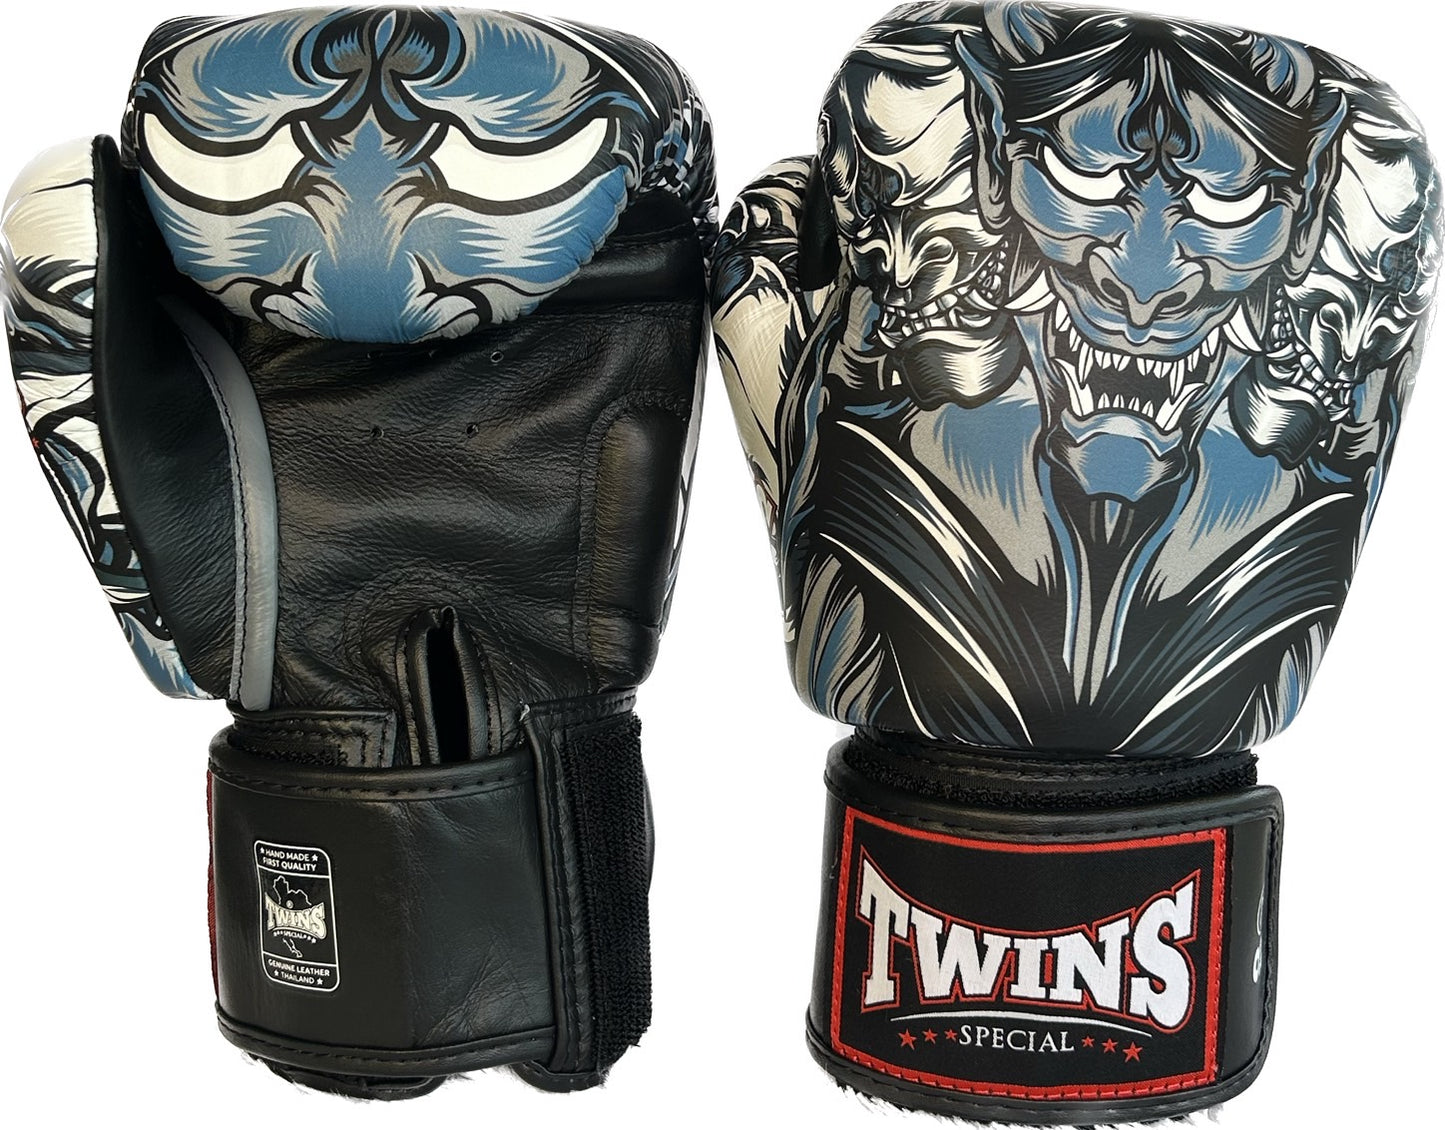 Twins Special Boxing Gloves Fbgvl3-58 Grey Black